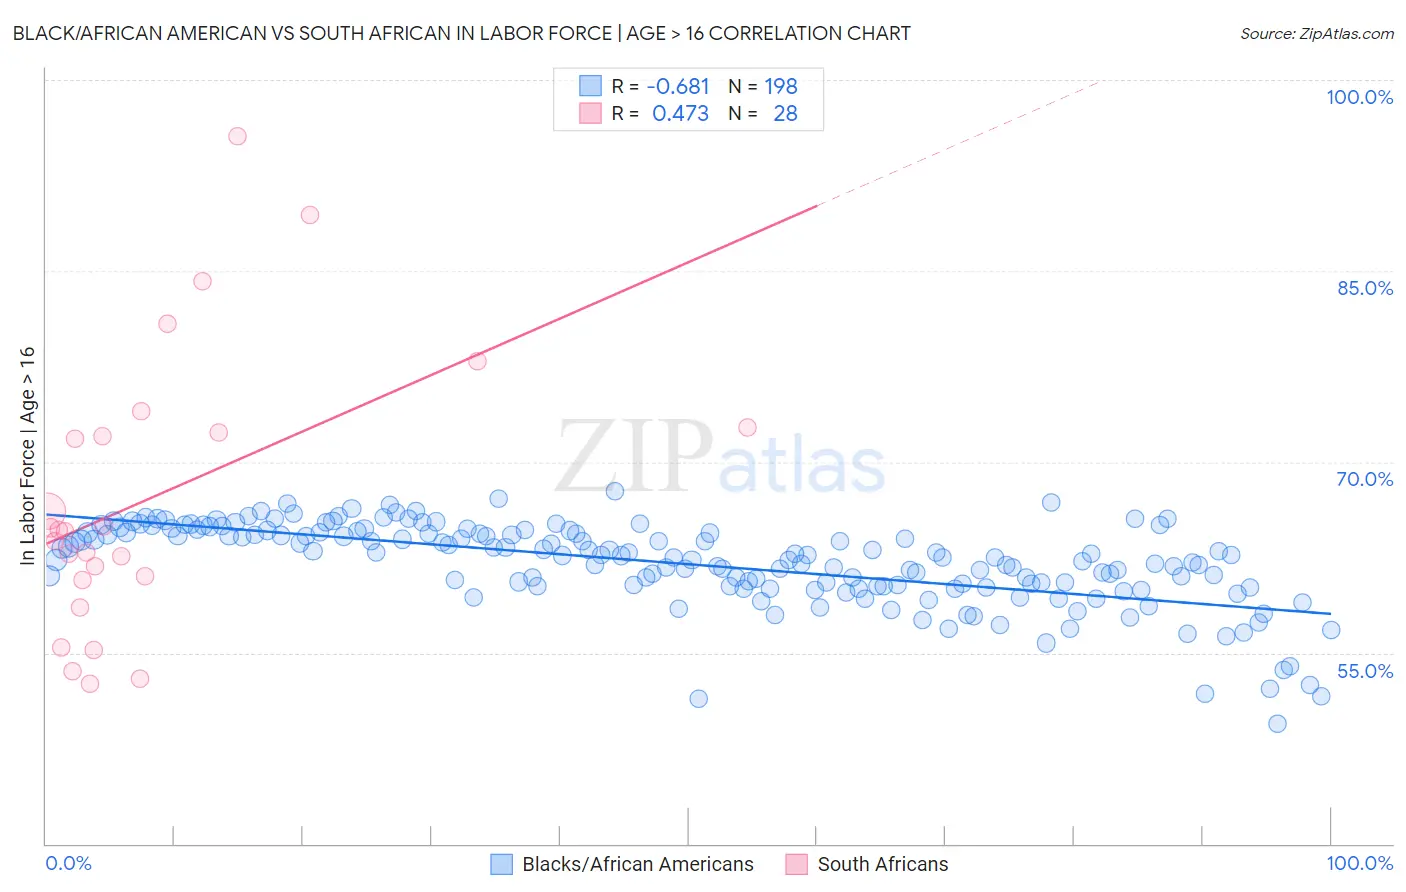 Black/African American vs South African In Labor Force | Age > 16